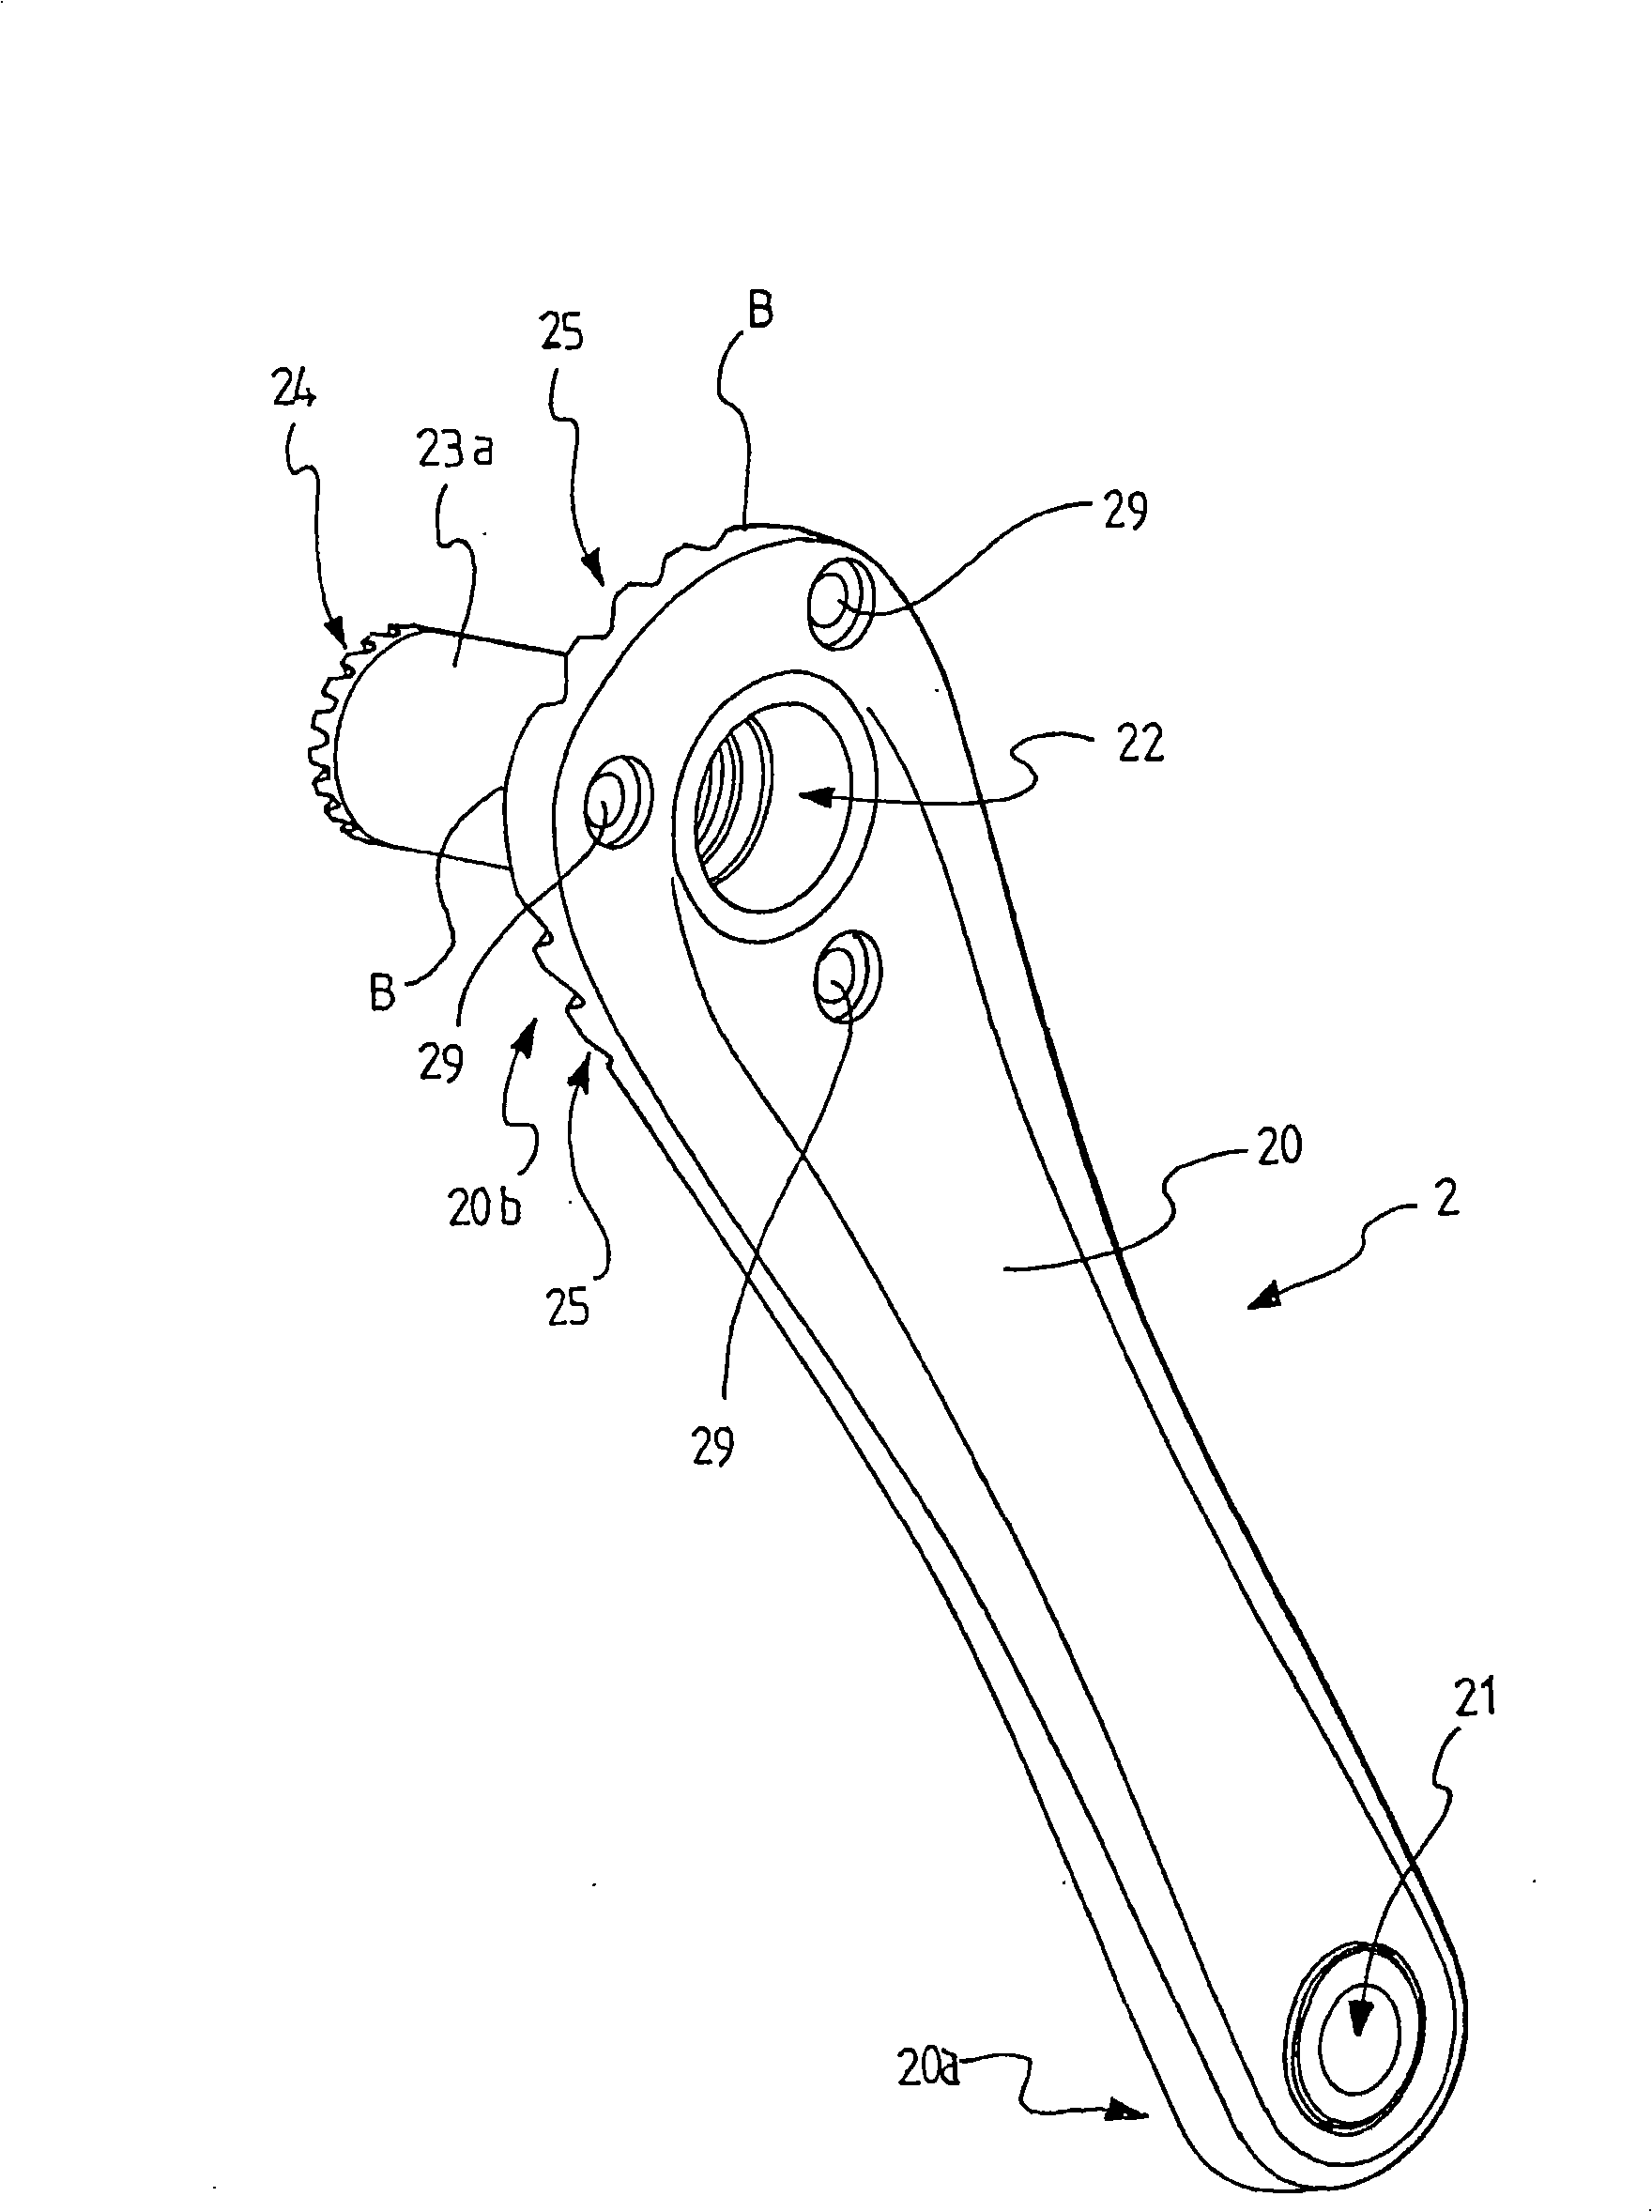 Crank arm assembly and related crank arm and element for transmitting torque from the crank arm to a bicycle chain